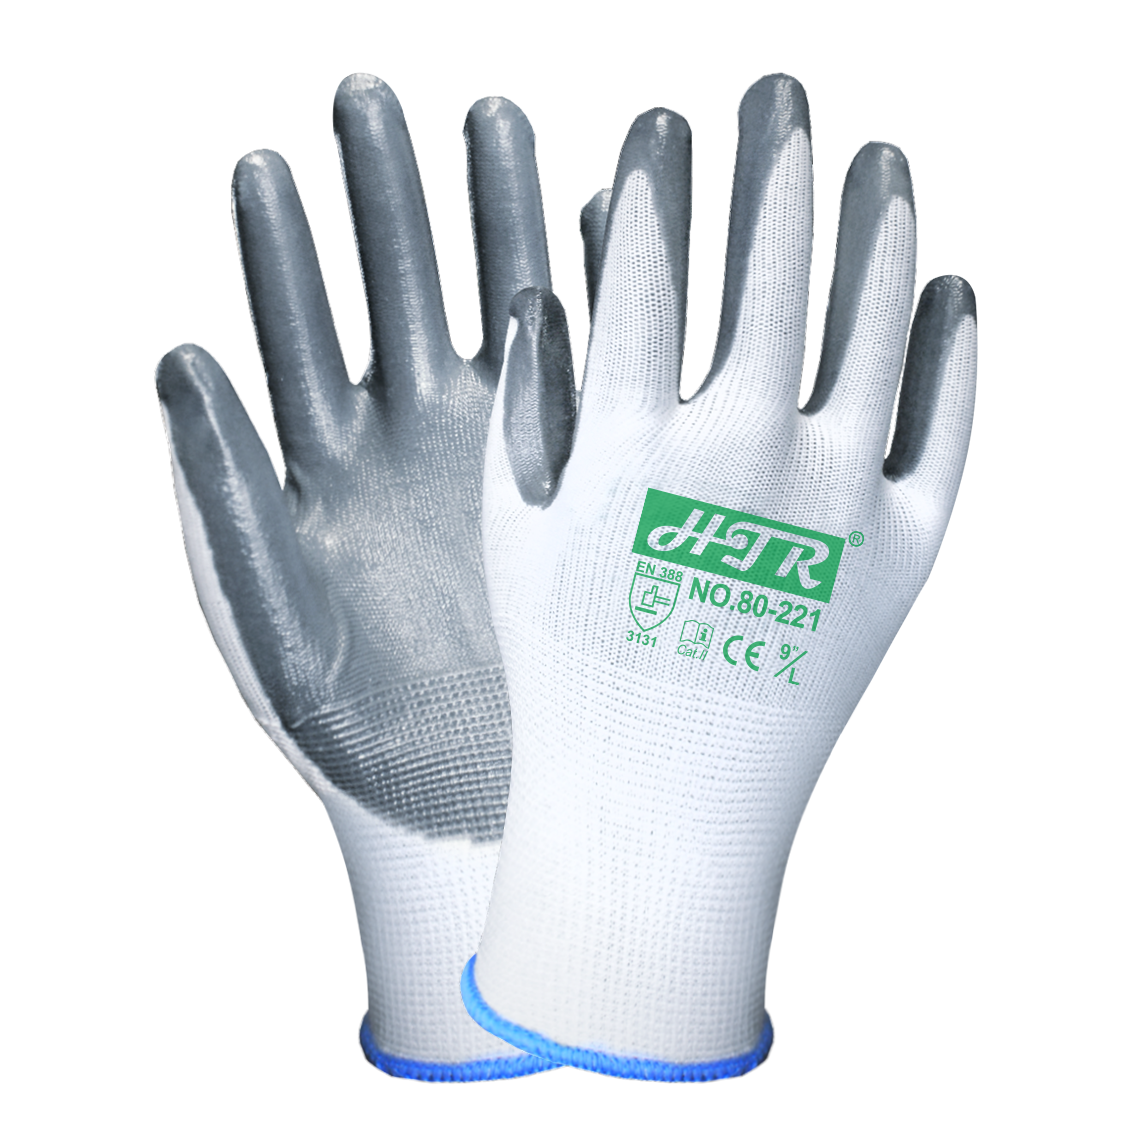 Nitrile dipping gloves